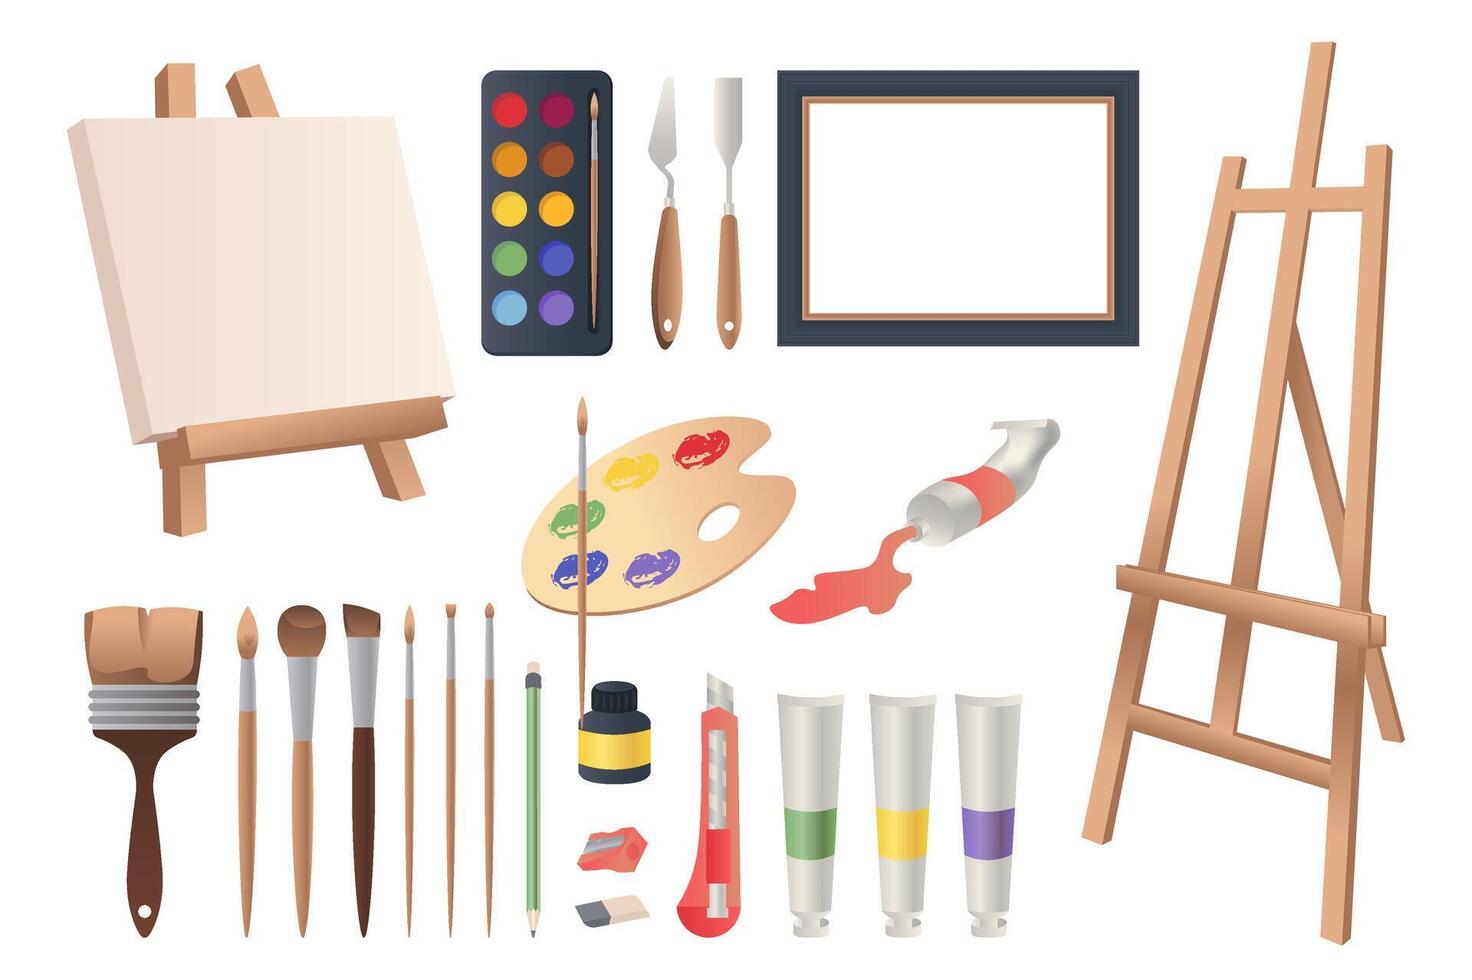 Art tools mega set in flat design. Bundle elements of painting canvas, watercolor or acrylic paints, spatulas, easel, palette, brushes, pencils and other. Vector illustration isolated graphic objects